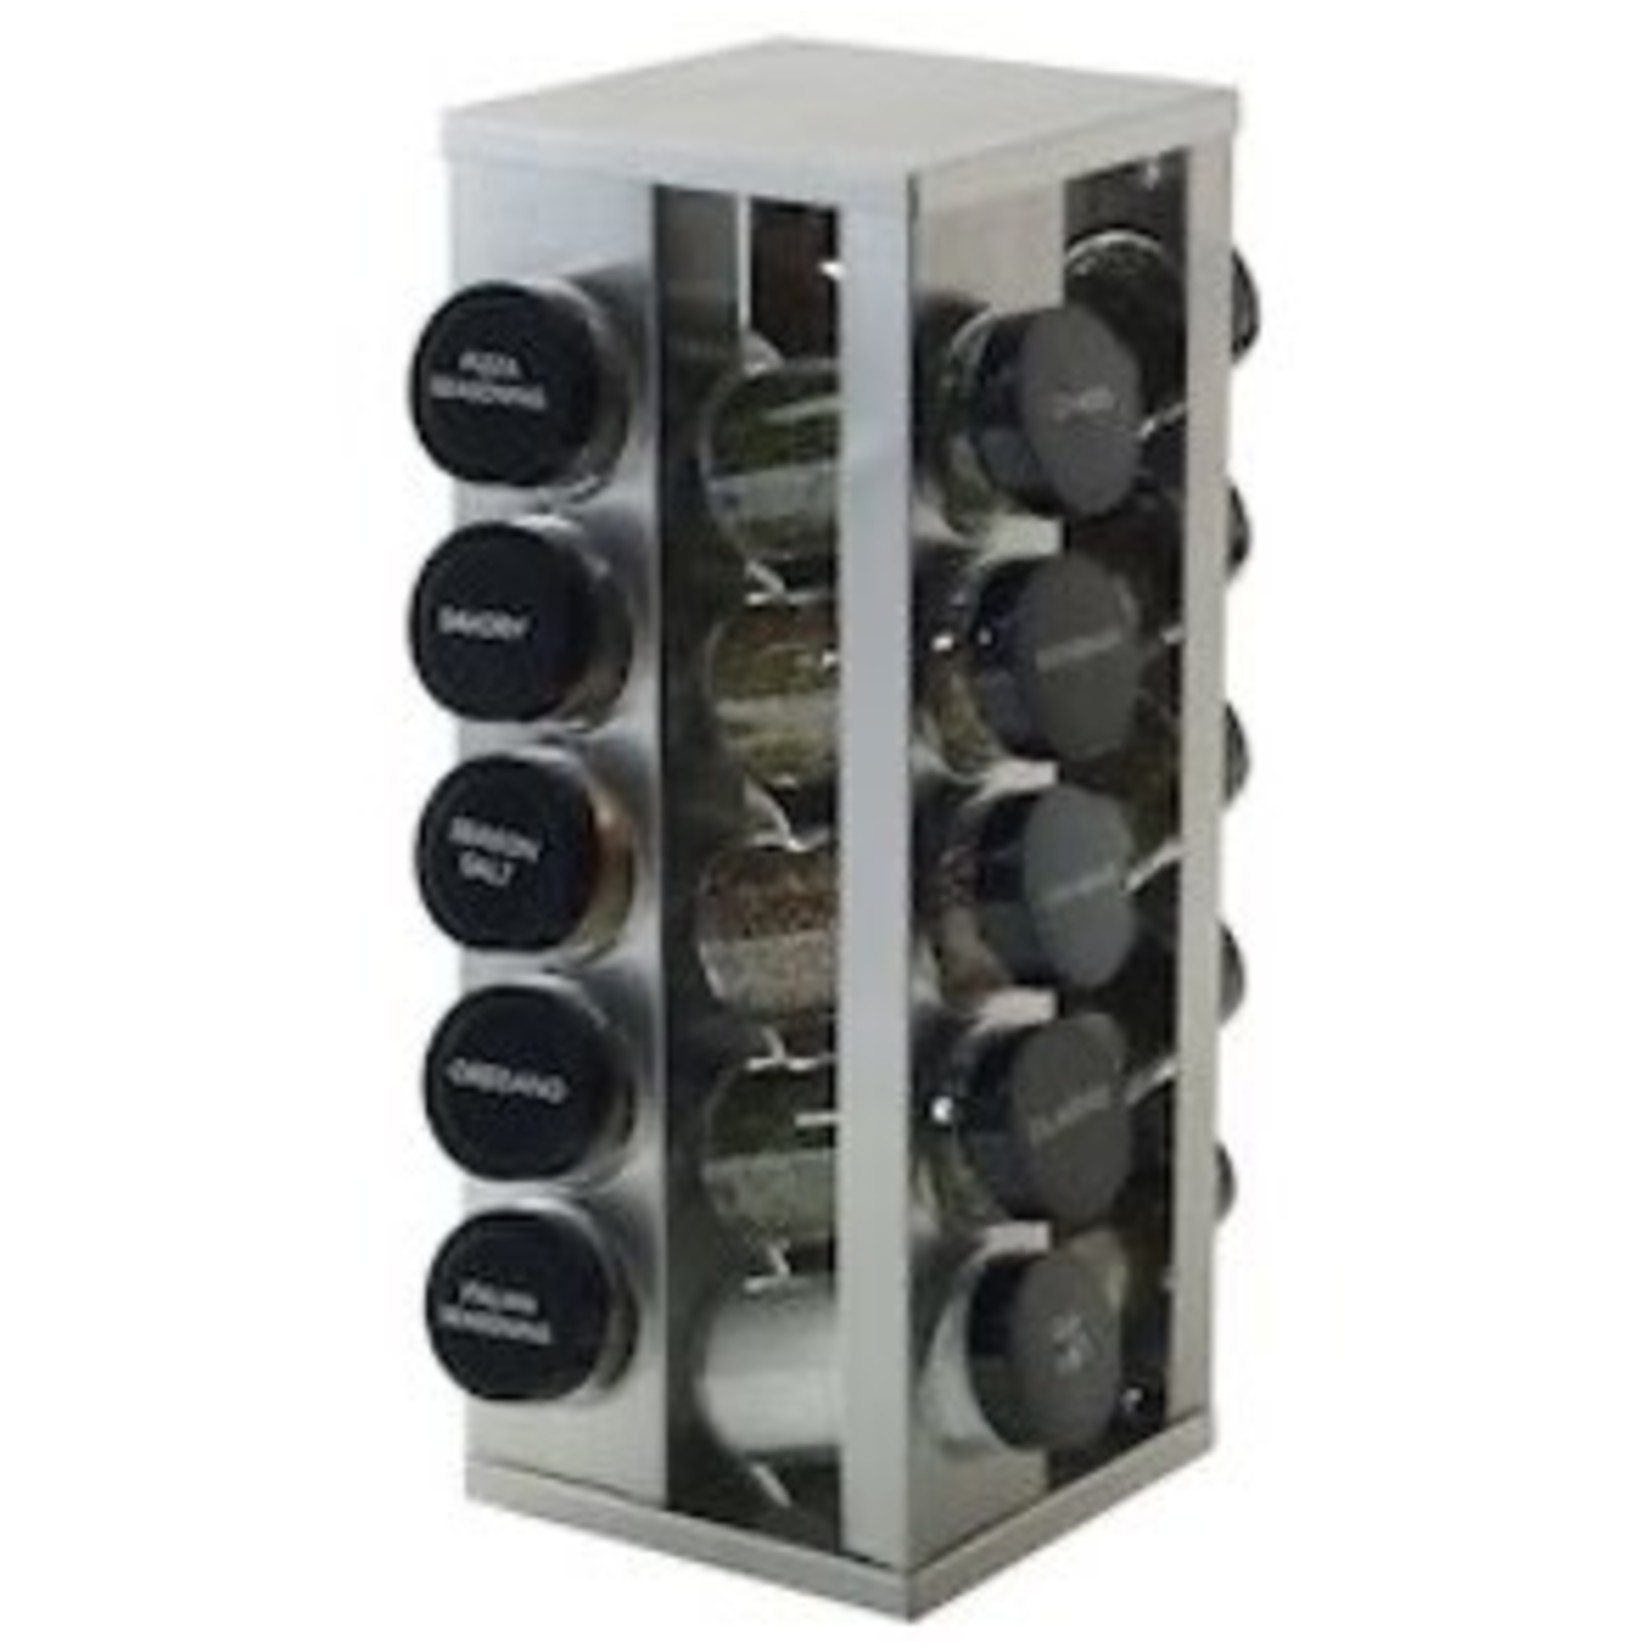 Allrecipes Revolving 20-Jar Spice Rack Tower Organizer with Free Spice  Refills for 5 Years, Brushed Stainless Steel